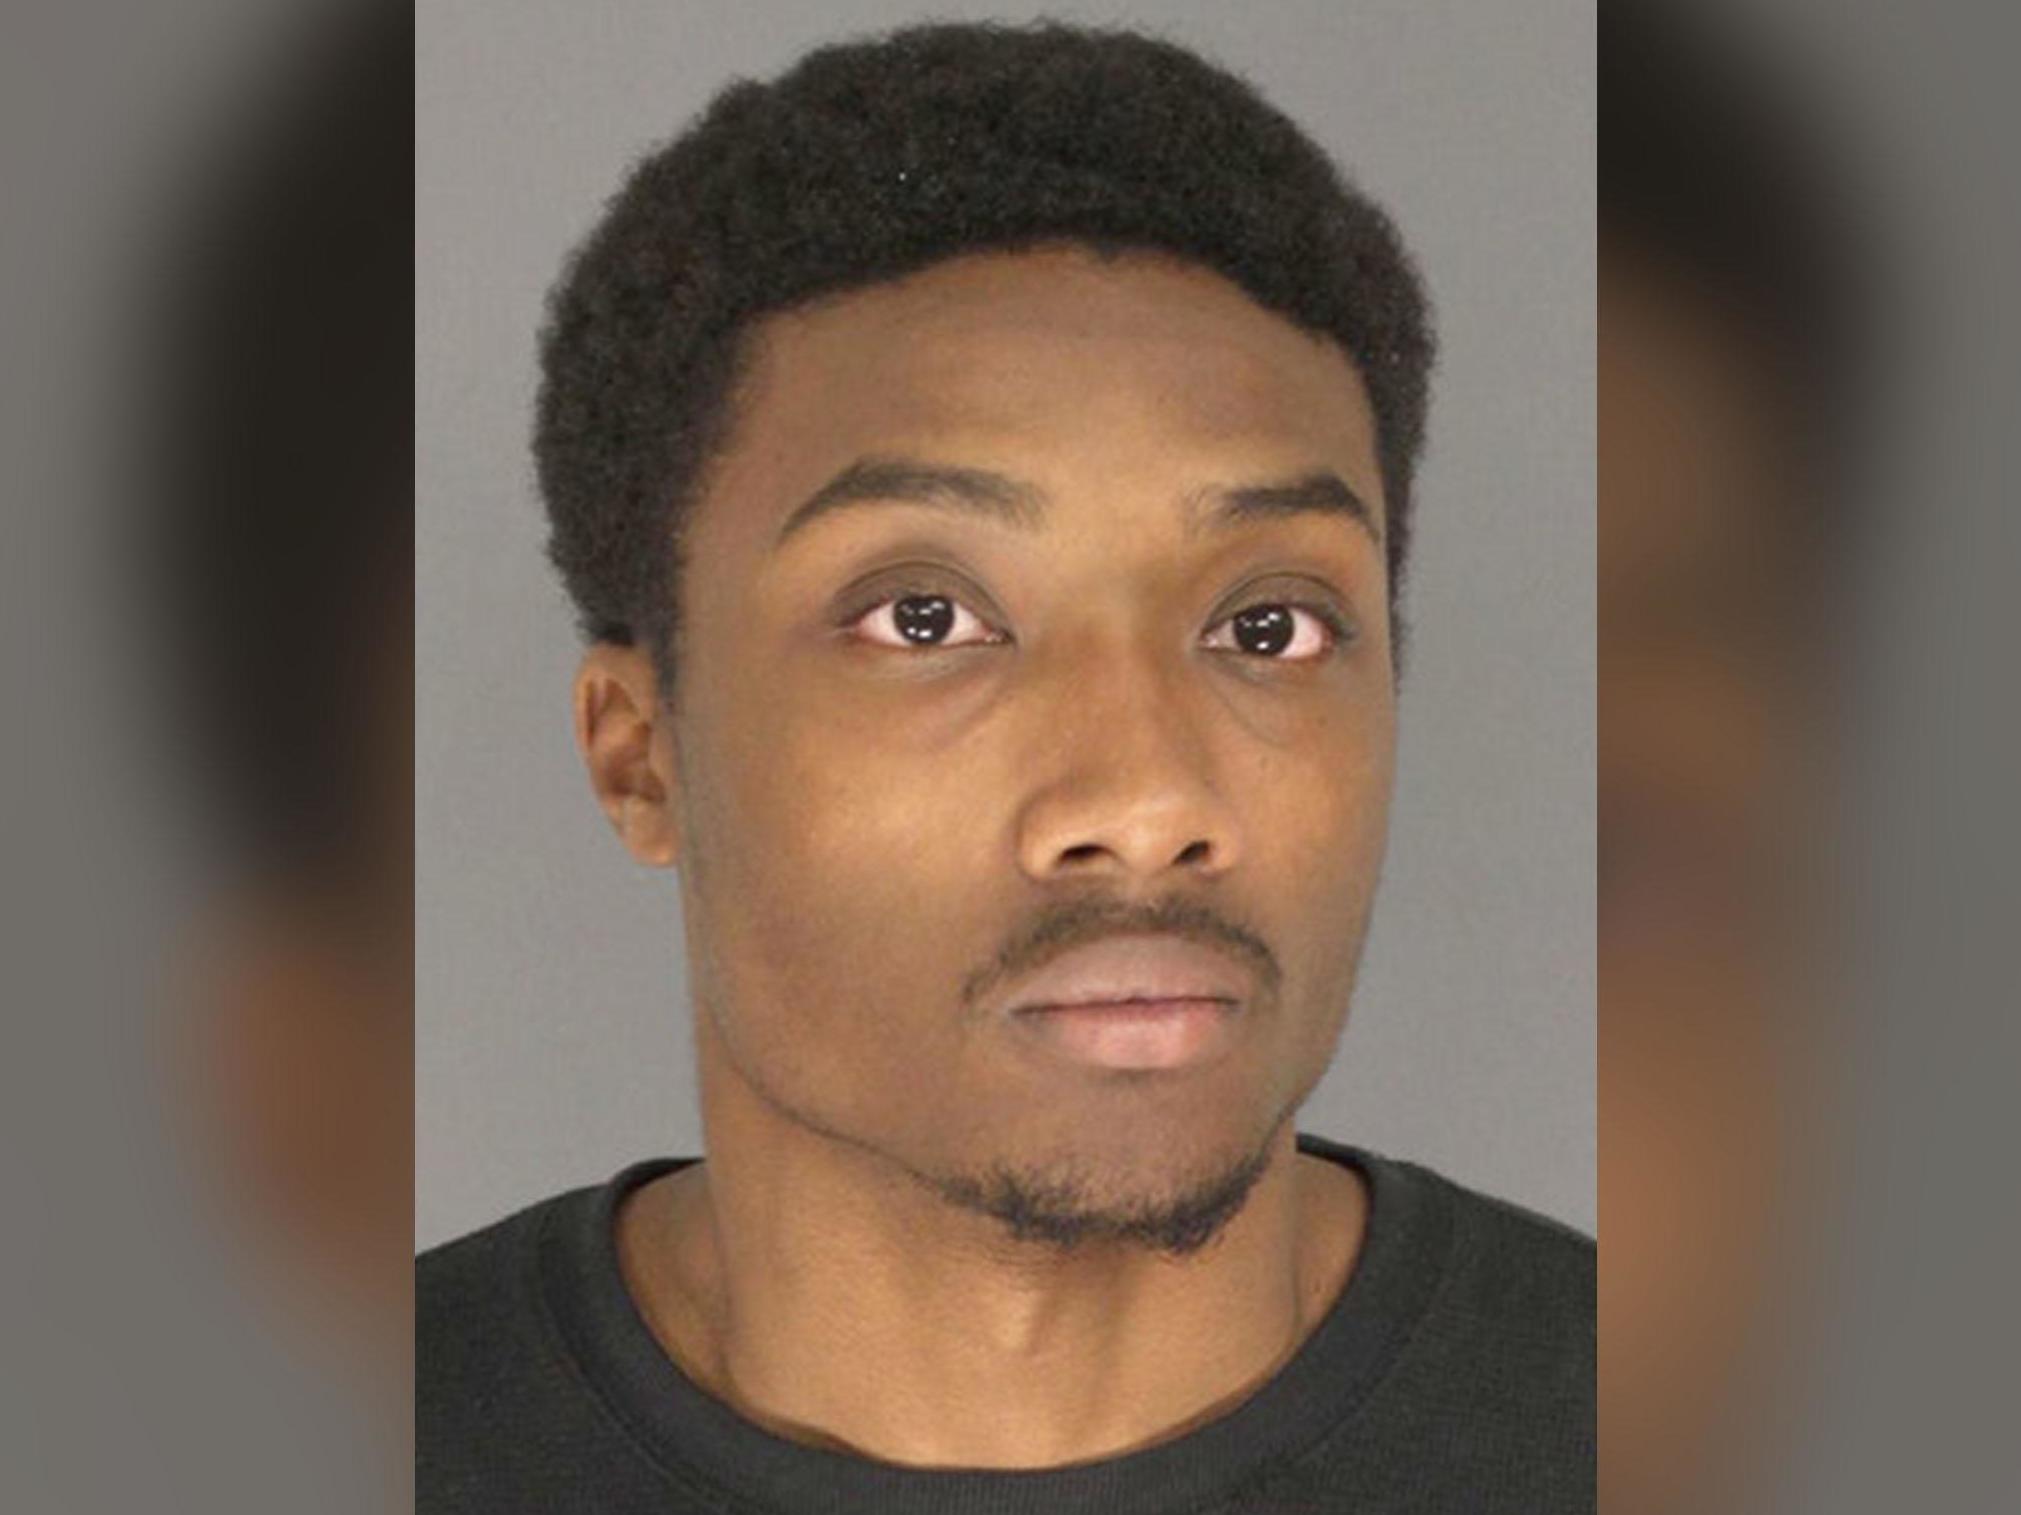 Khalil Wheeler-Weaver is on trial for murdering three women and raping a fourth